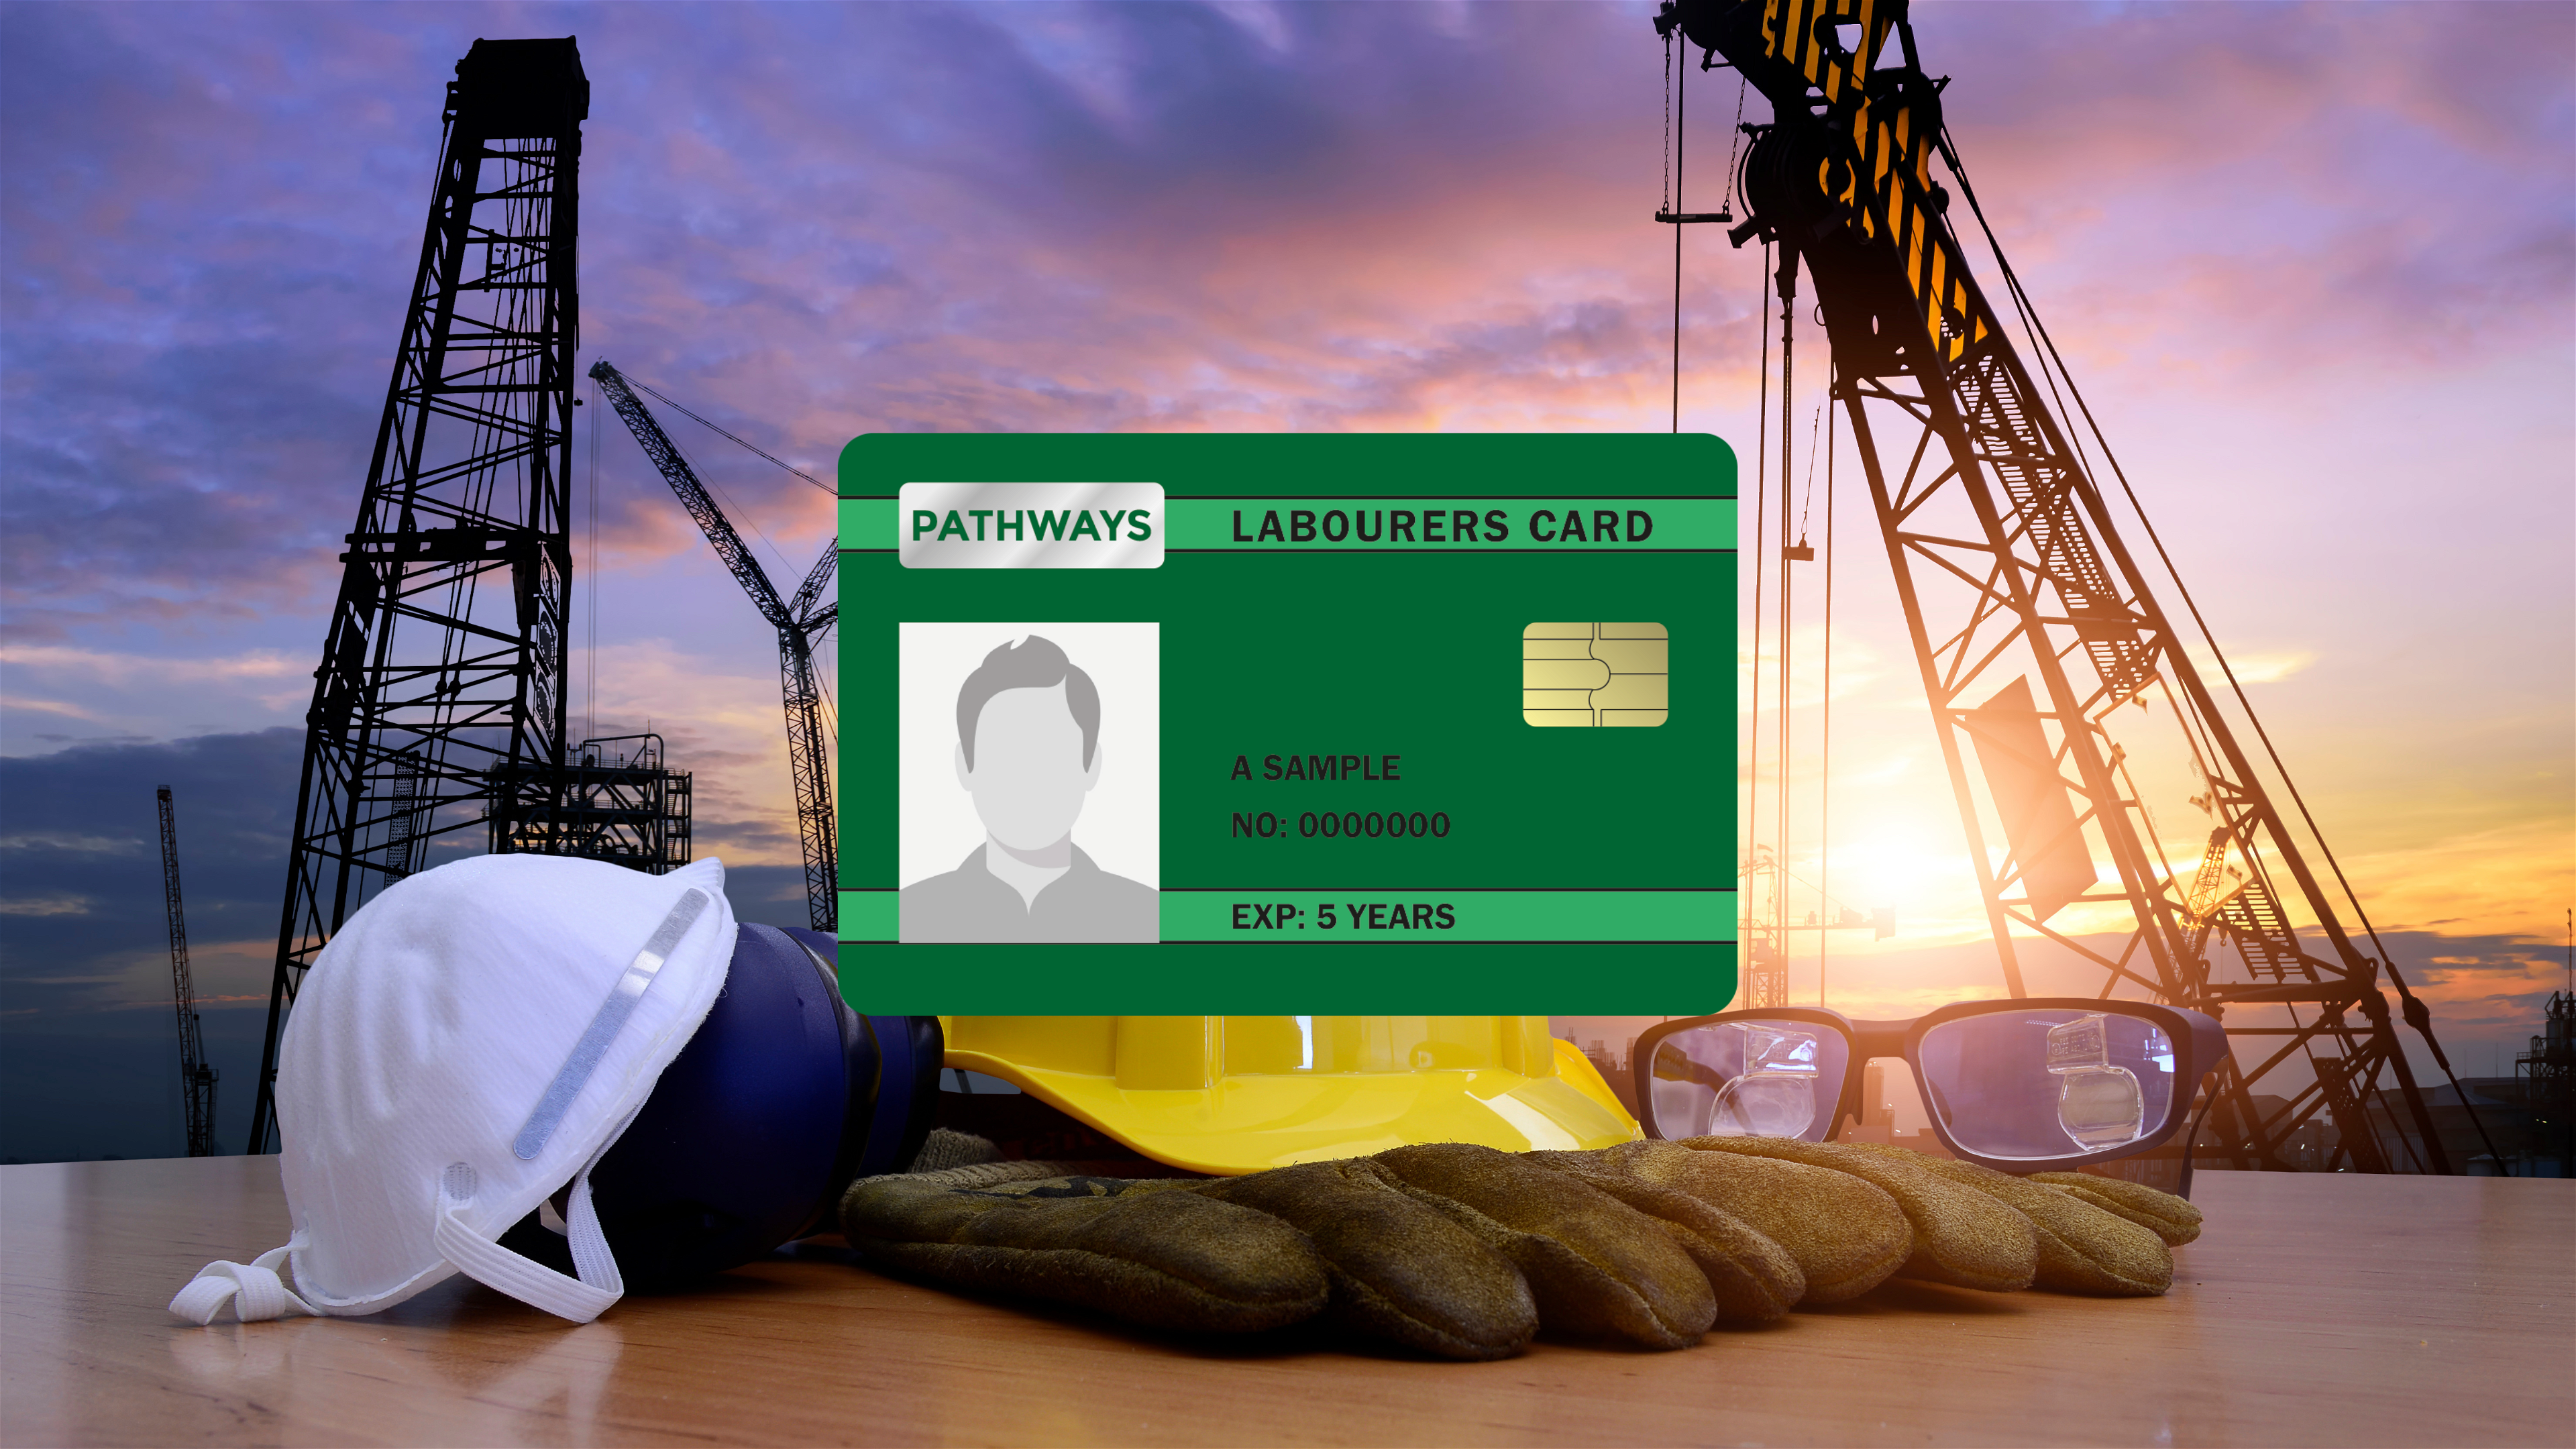 1 Day Health and Safety for CSCS Card